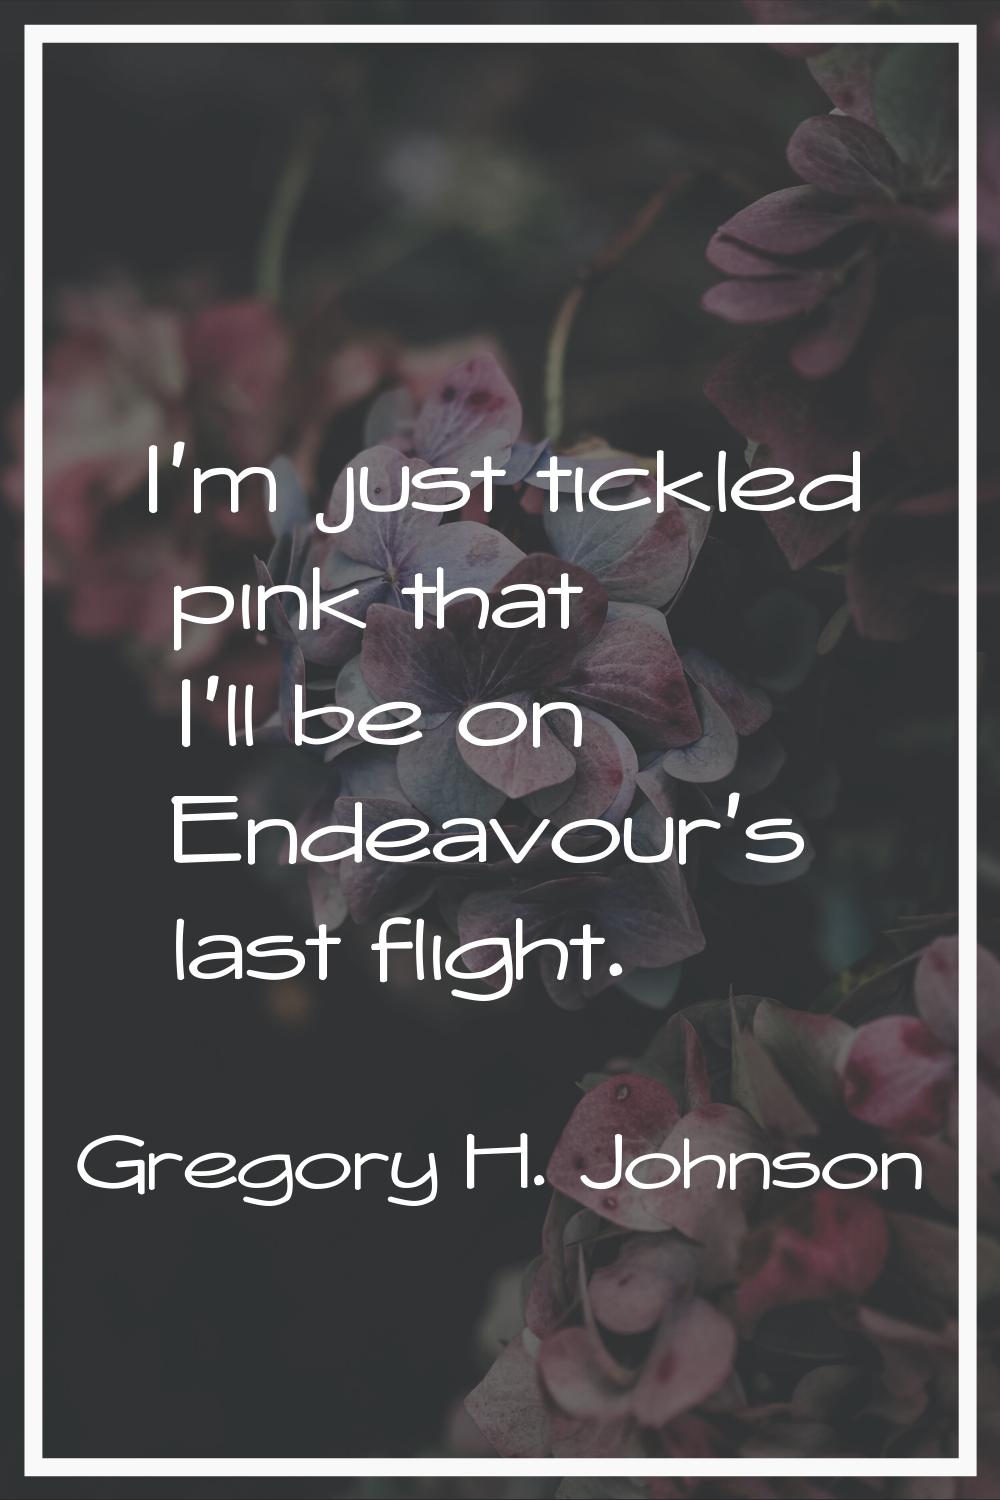 I'm just tickled pink that I'll be on Endeavour's last flight.